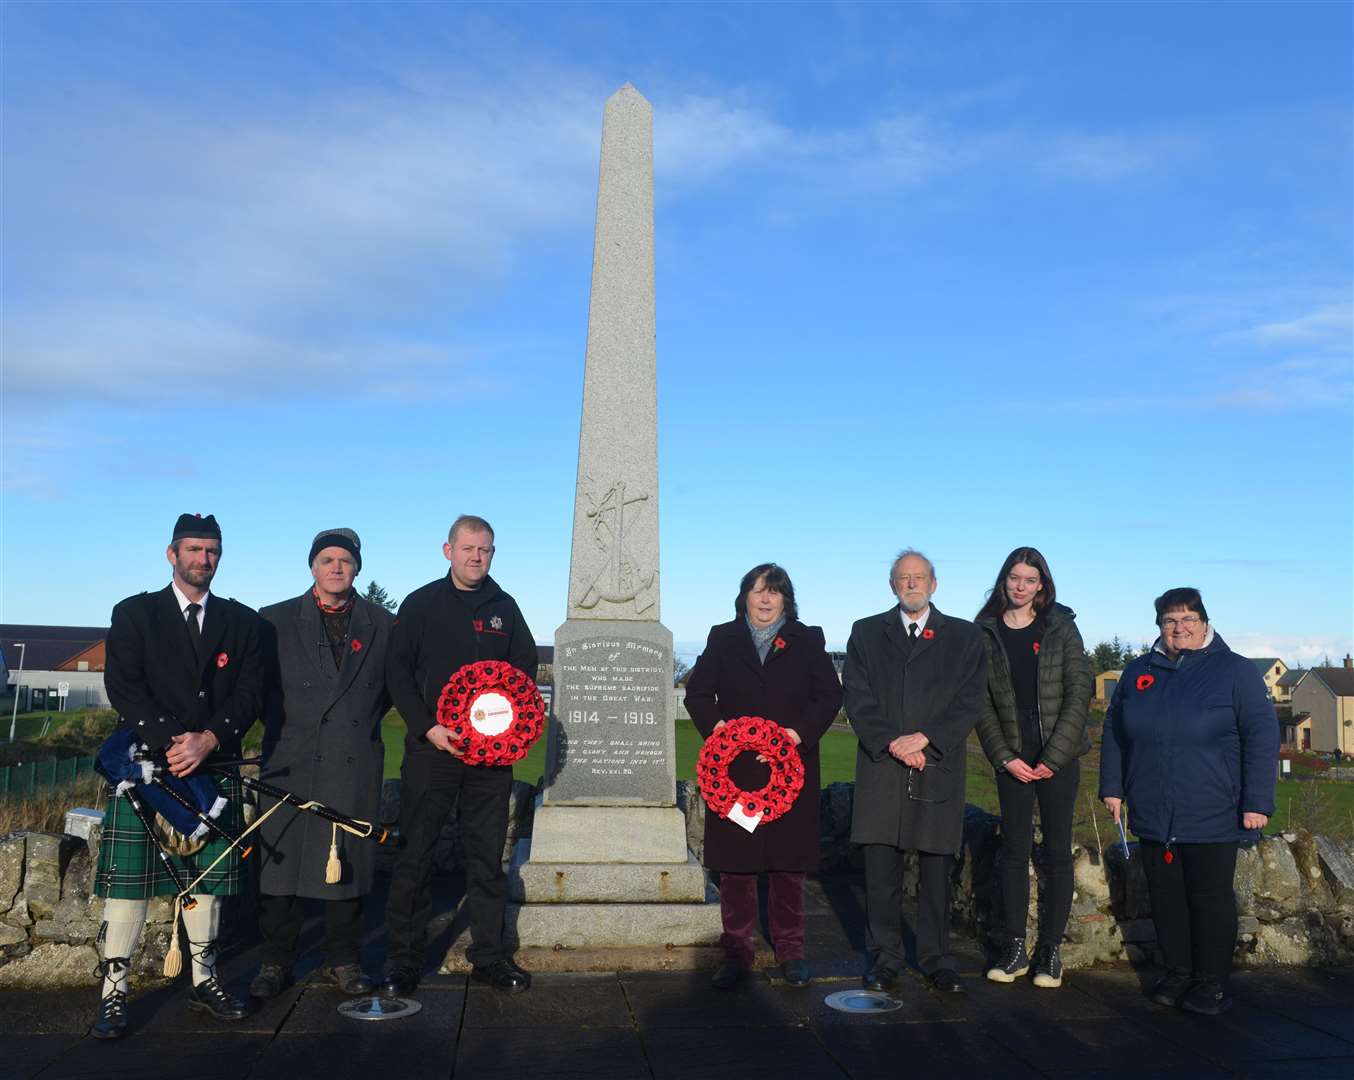 From left: Billy Maclean, piper; Pete Malone; firefighter Stephen Mackay; Pauline Mackay; Peter Dyson; Alana Drennan; and Amanda Mackay at Bettyhill War Memorial after the two-minute silence on Remembrance Sunday. Picture: Jim A Johnston.